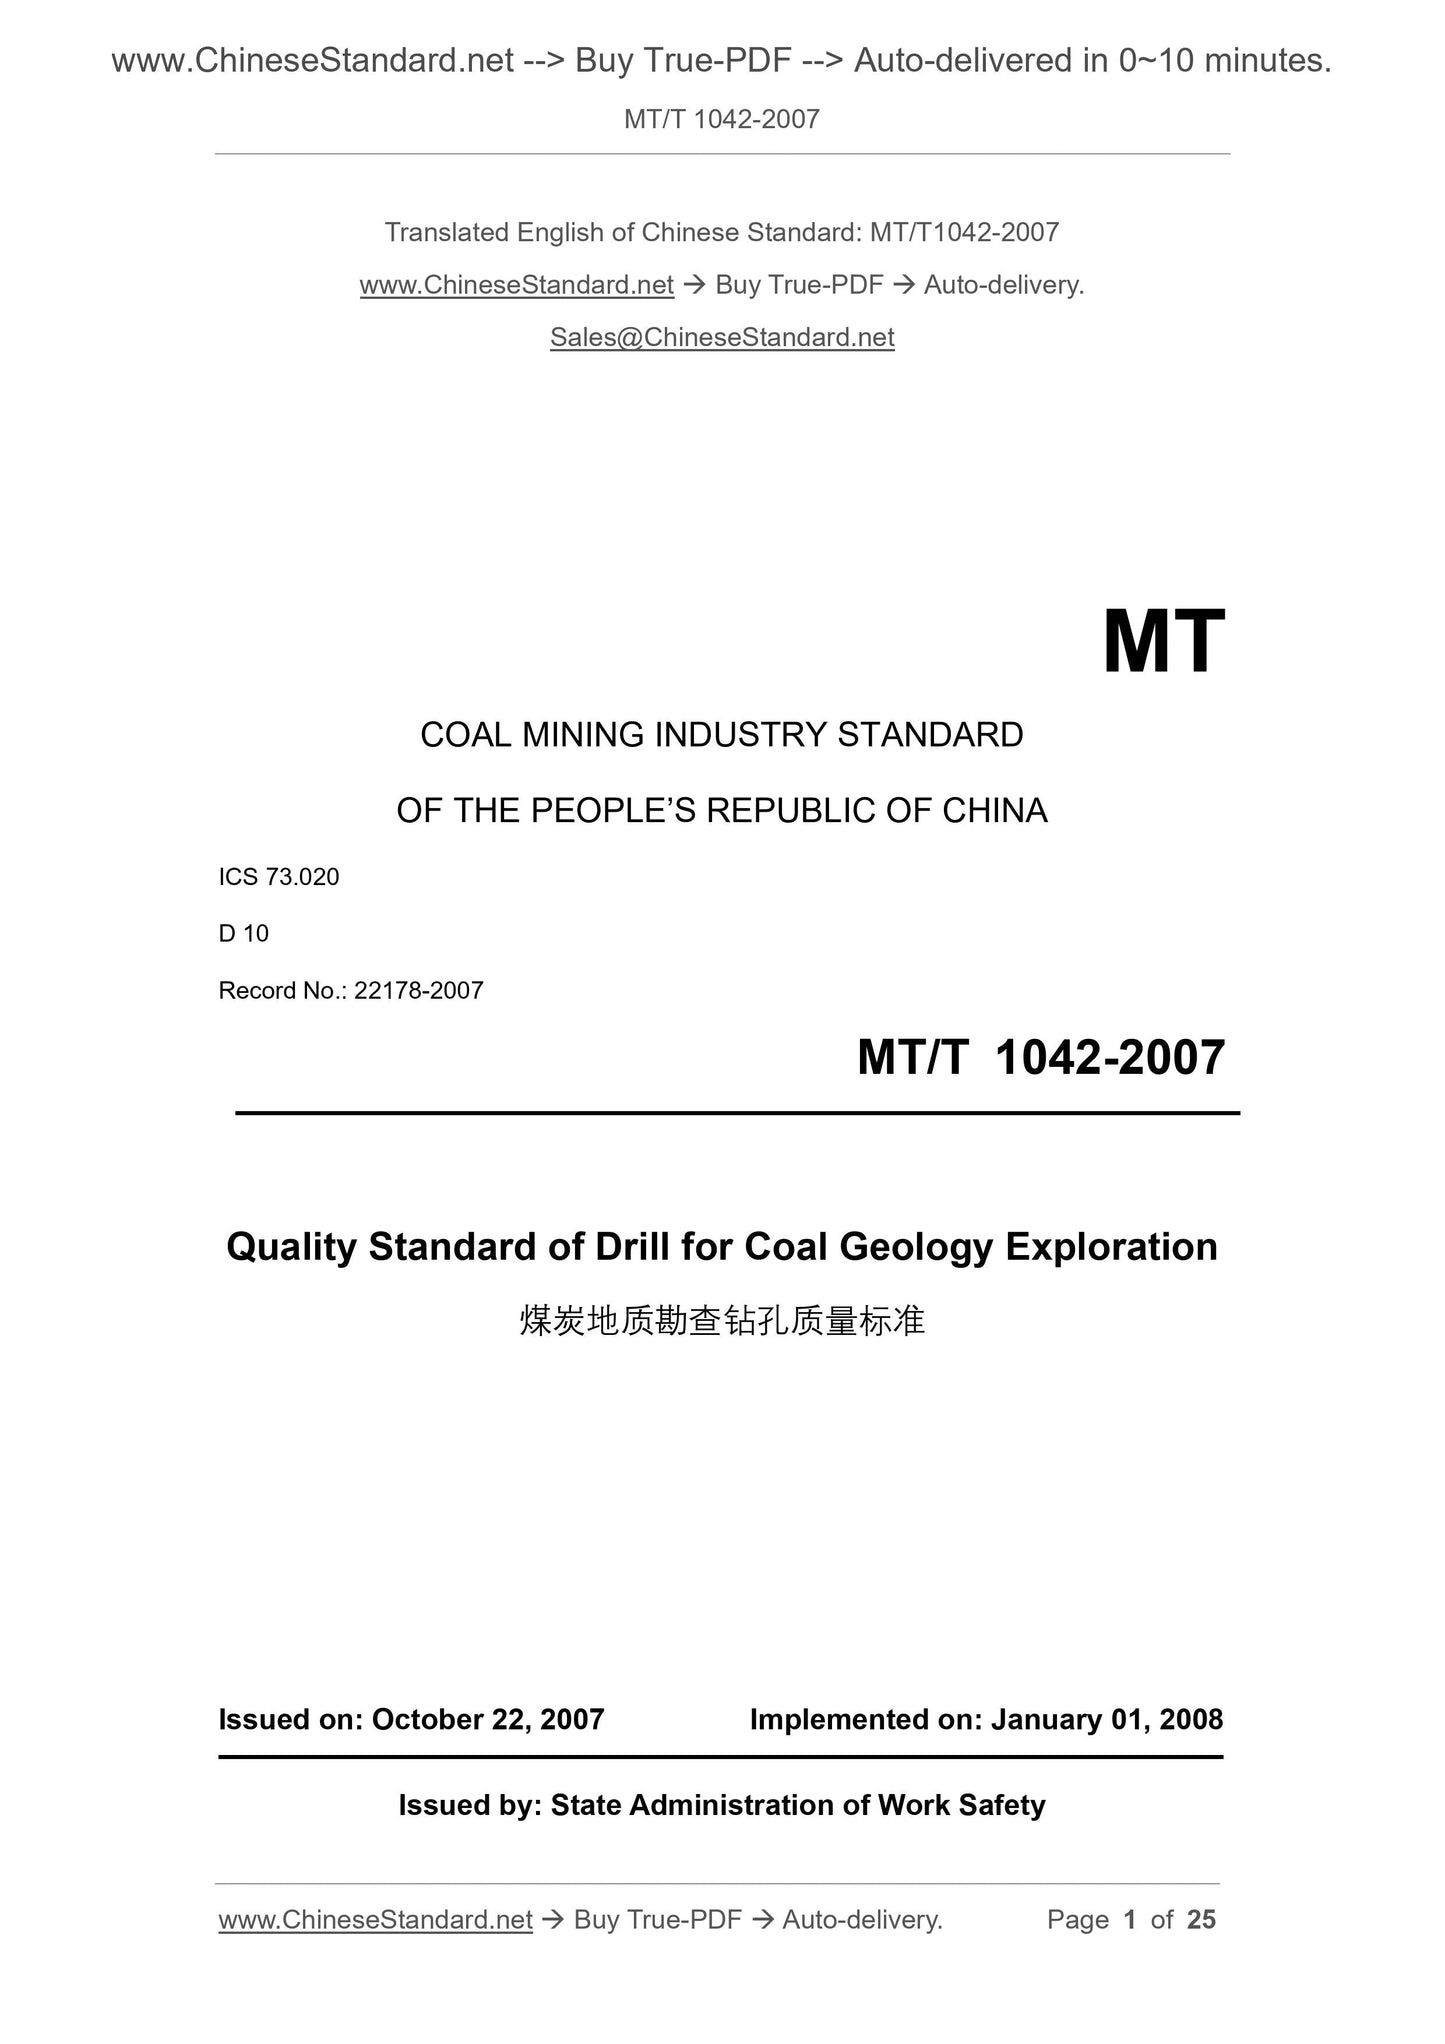 MT/T 1042-2007 Page 1